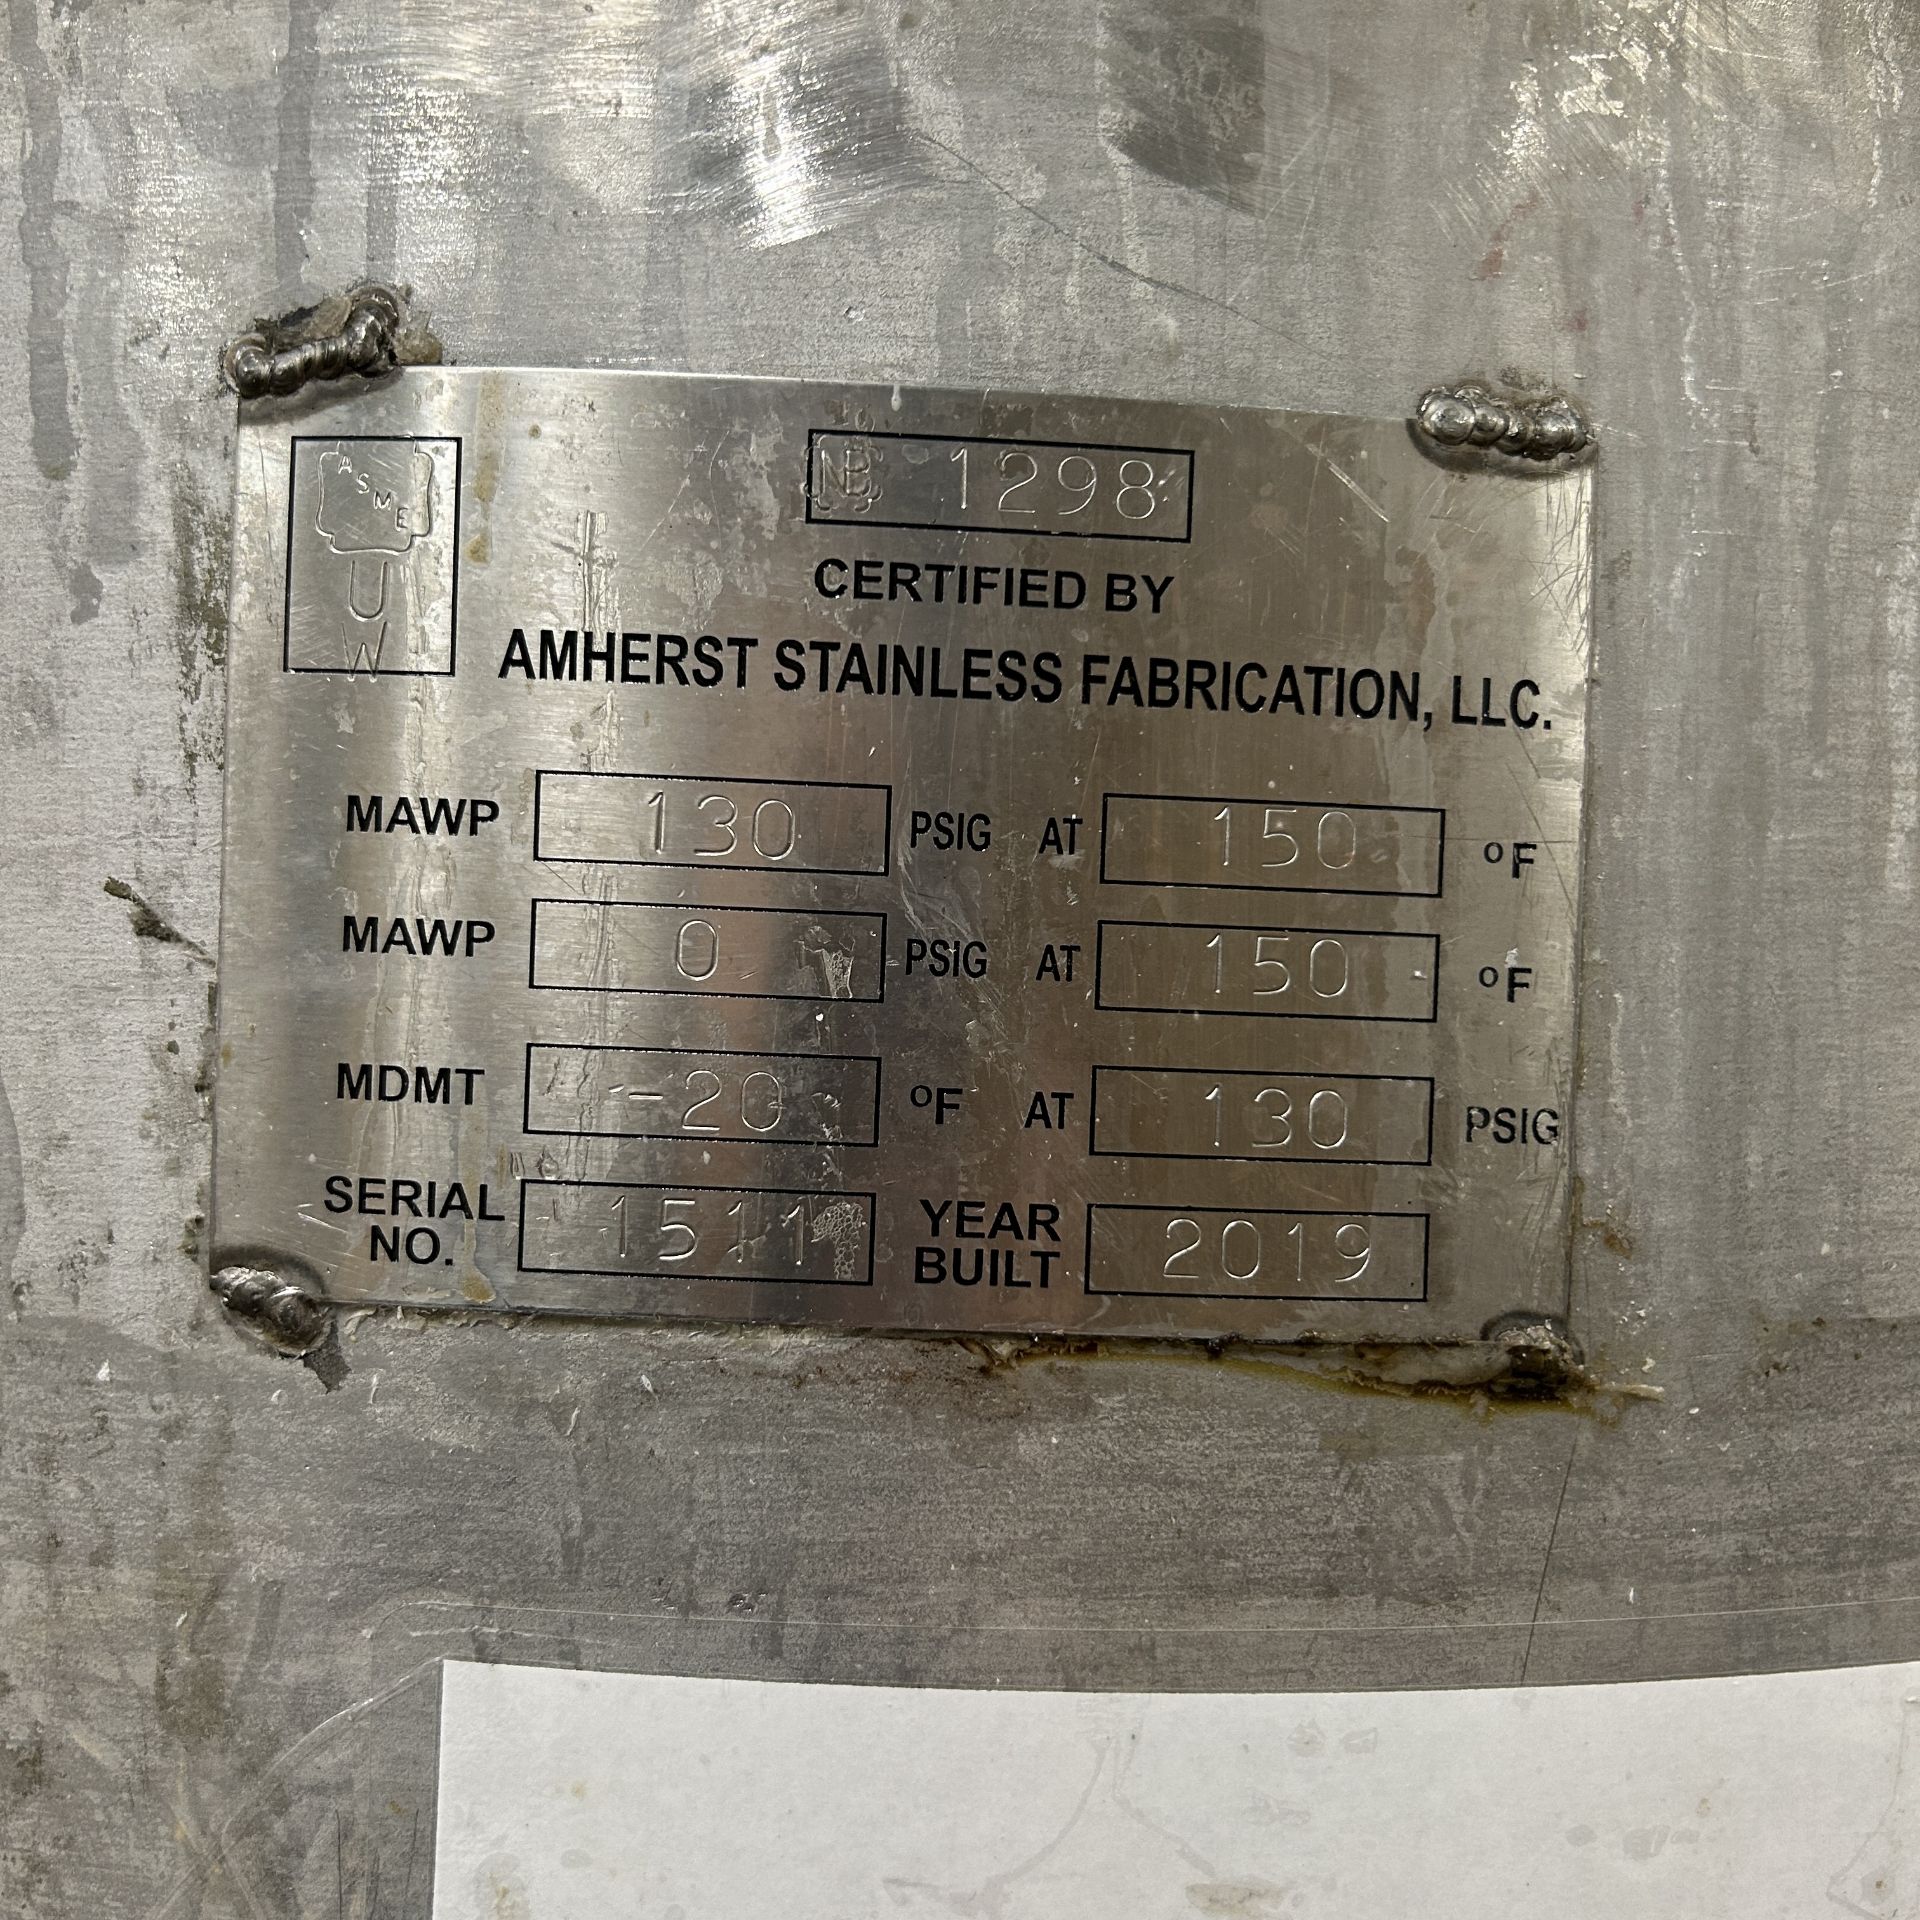 2019 Amherst Stainless Steel Agitation Pressure Pot - Image 12 of 12